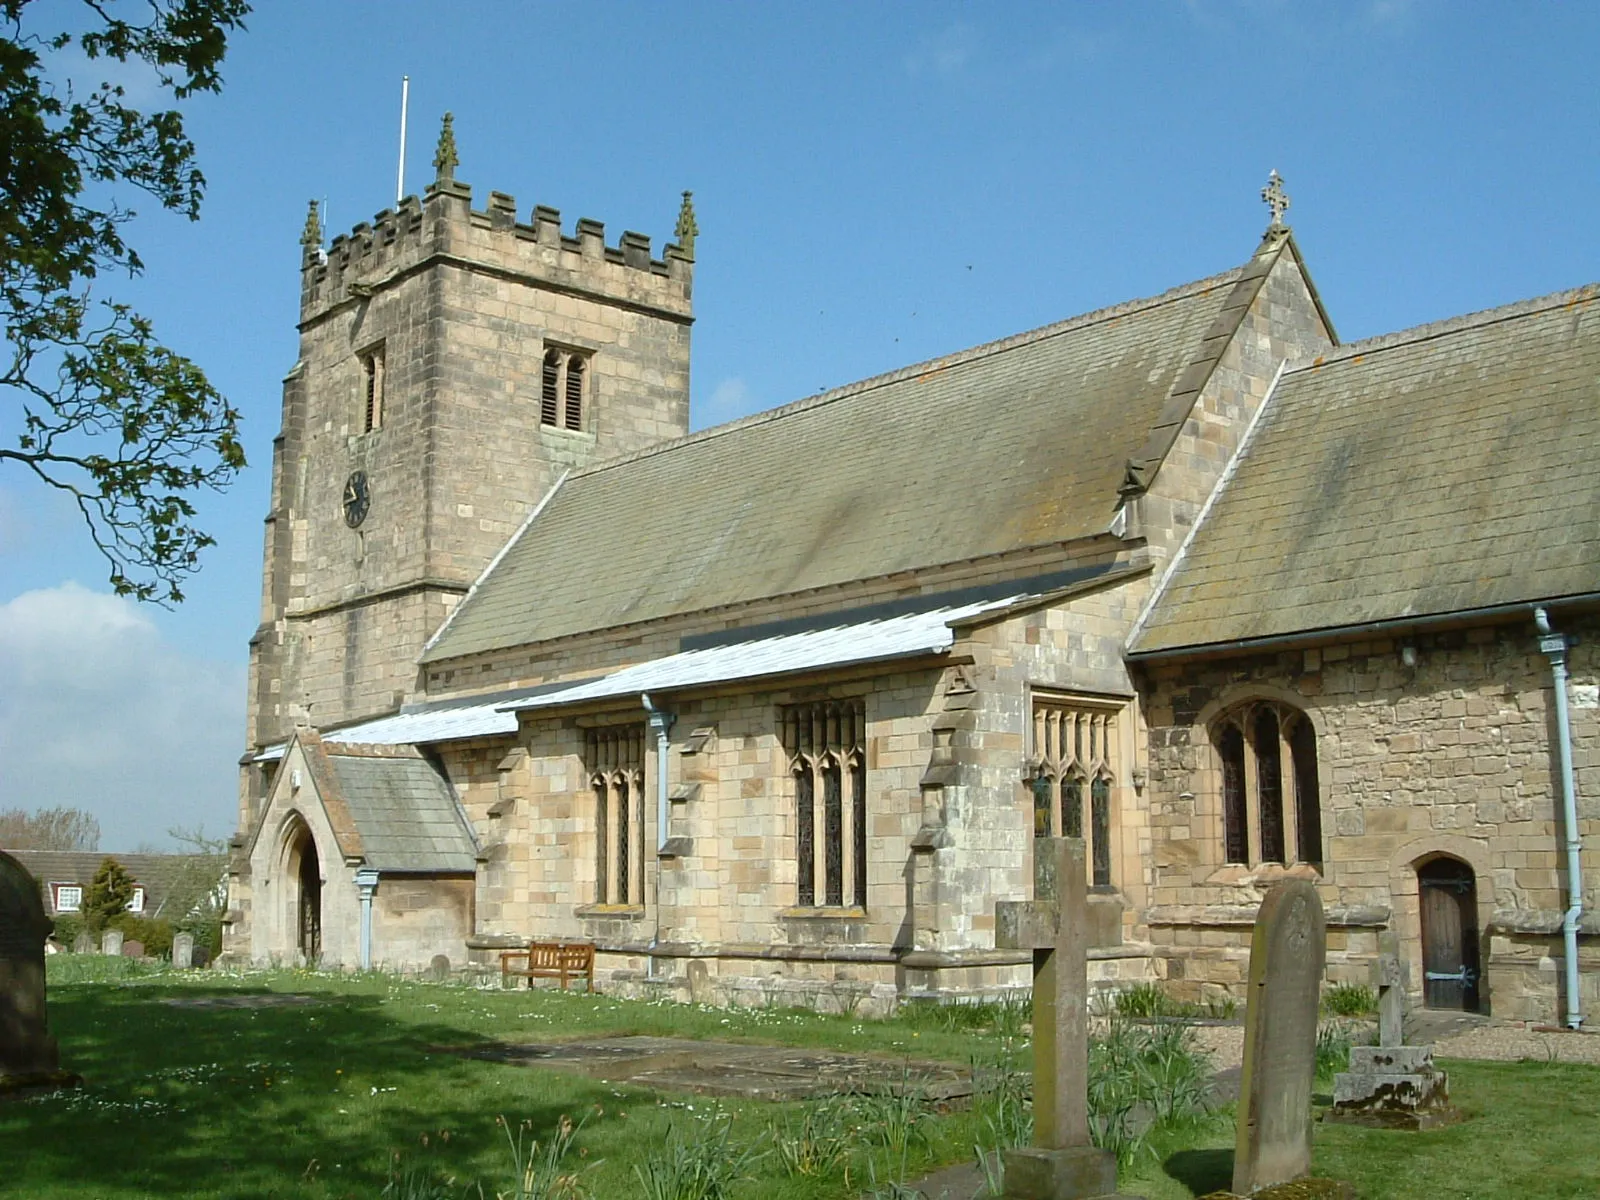 Photo showing: St Peter's Church, Hutton Cranswick, East Riding of Yorkshire, England. Taken by James@hopgrove, May 2005